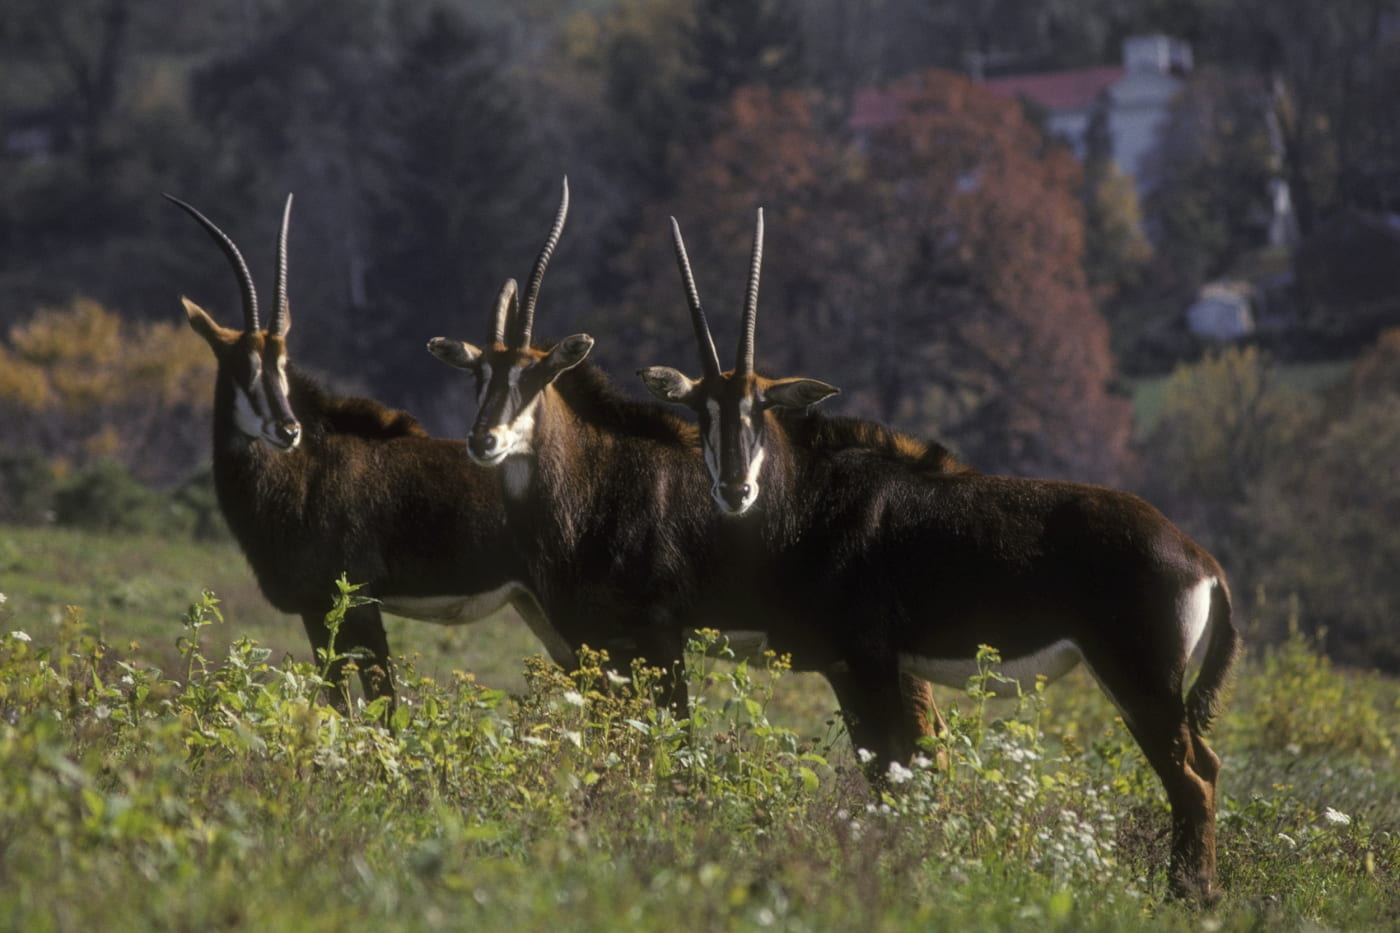 Scientists Sequence the Sable Antelope’s Genome for the First Time